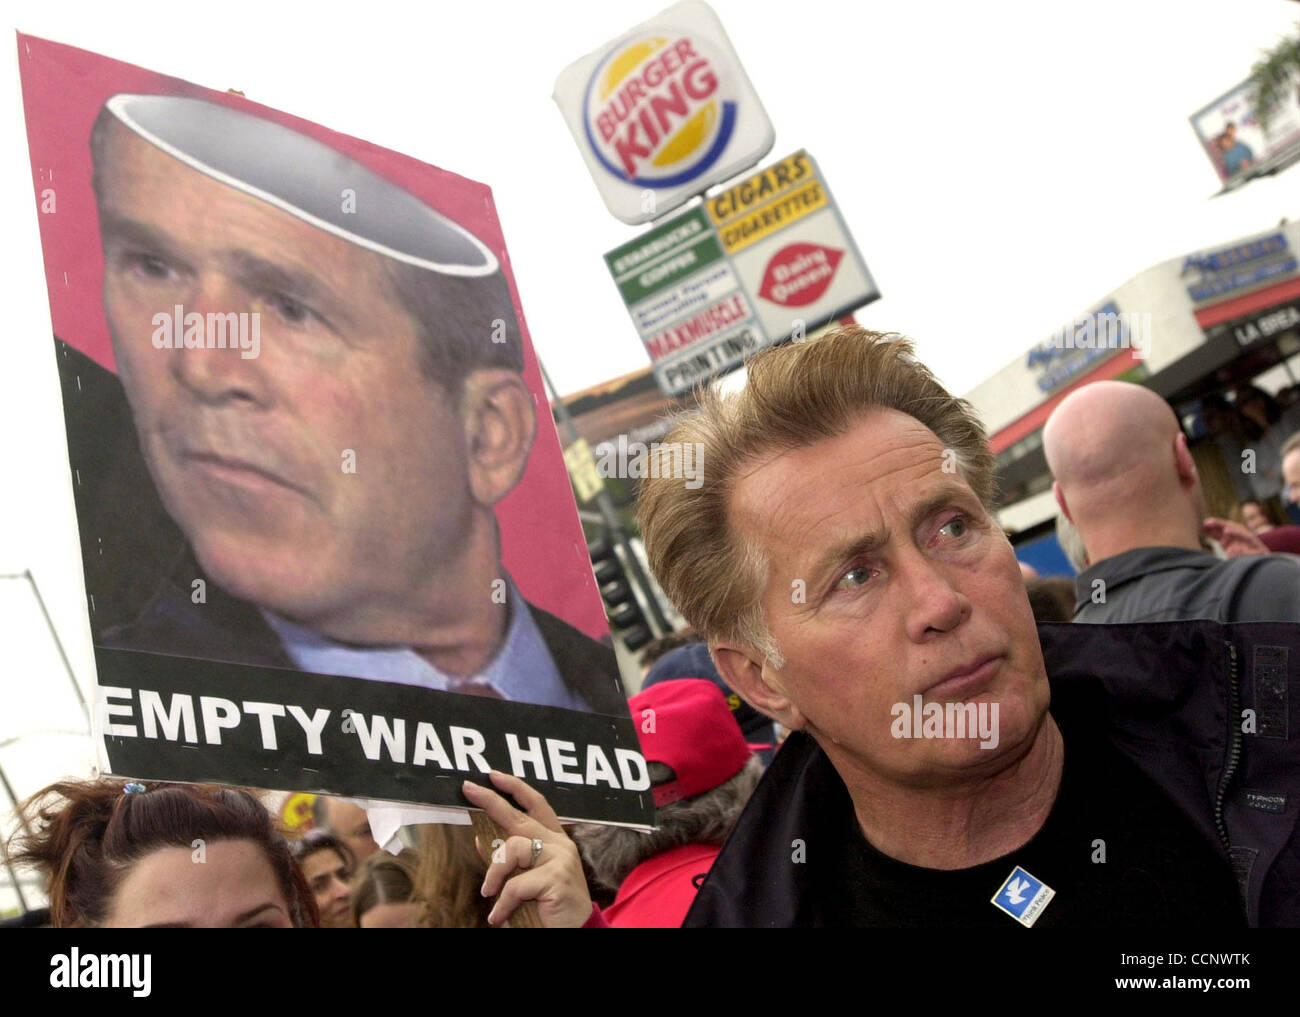 Feb 15, 2003; Hollywood, CA, USA; Television president Actor MARTIN SHEEN from NBC's West Wing participates in a war protest in Hollywood where he also spoke at the rally. Stock Photo